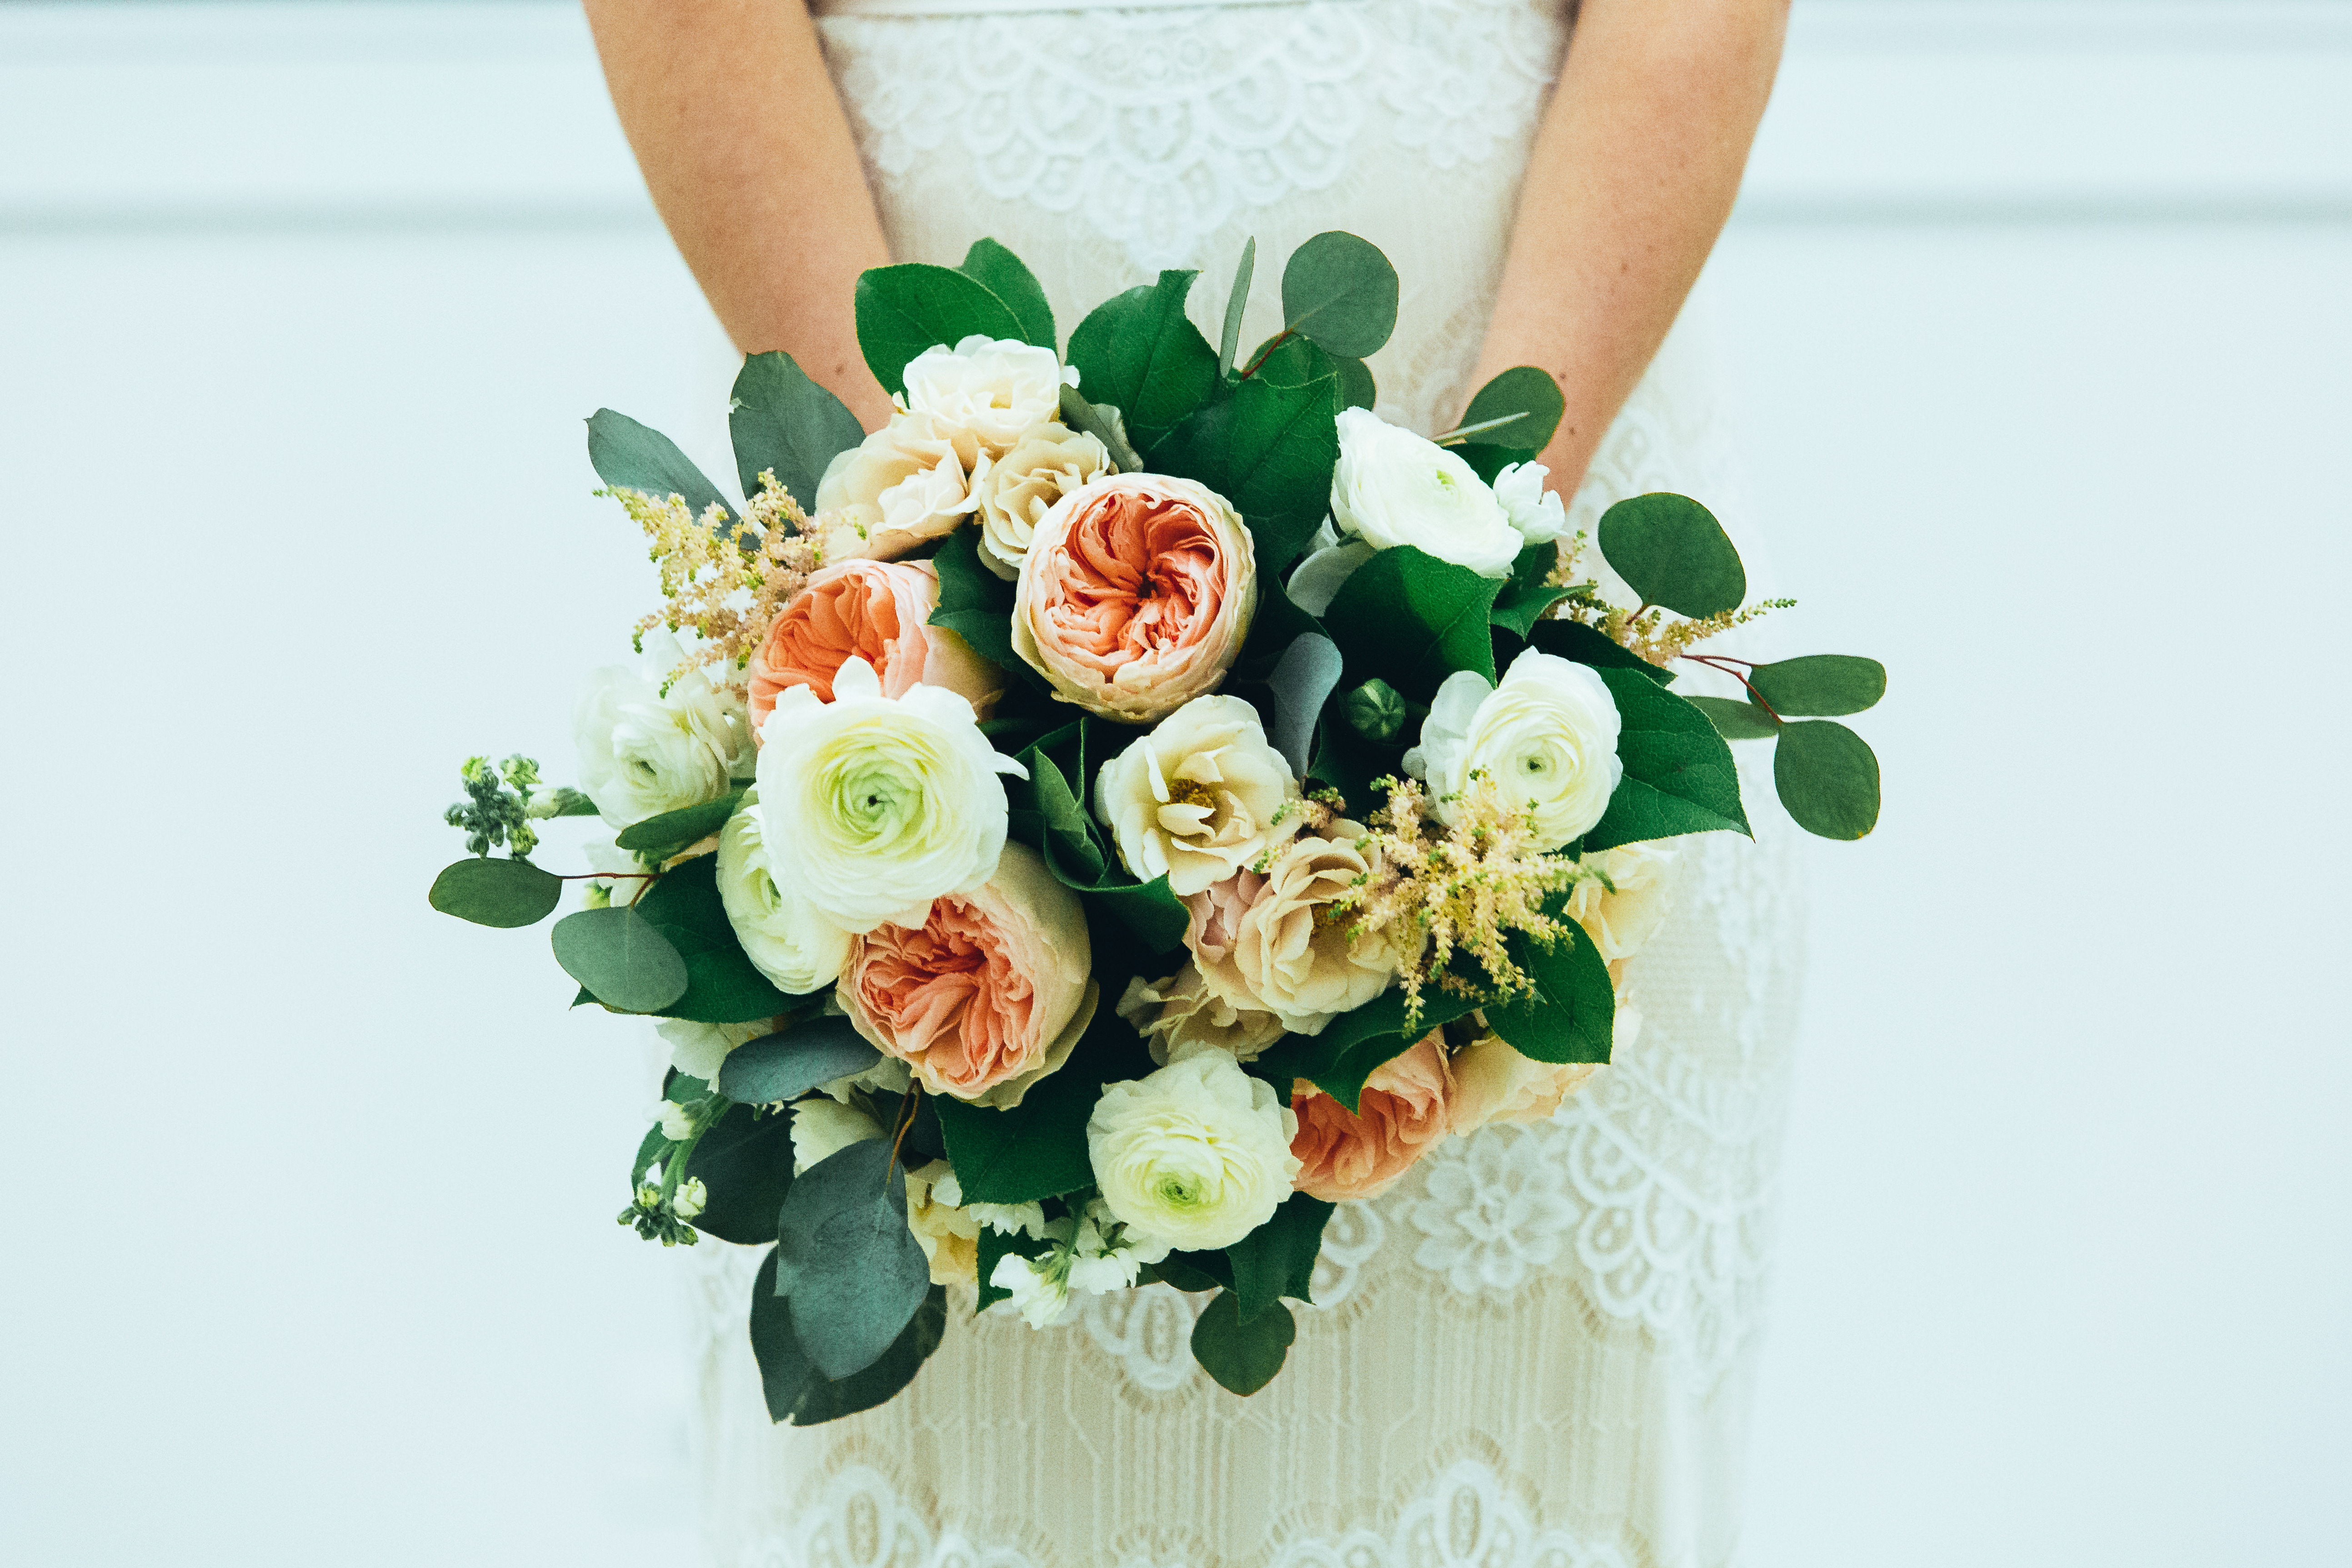 Coral garden roses in bridal bouquet with champagne astilbe, ranunculus, and lisianthus.